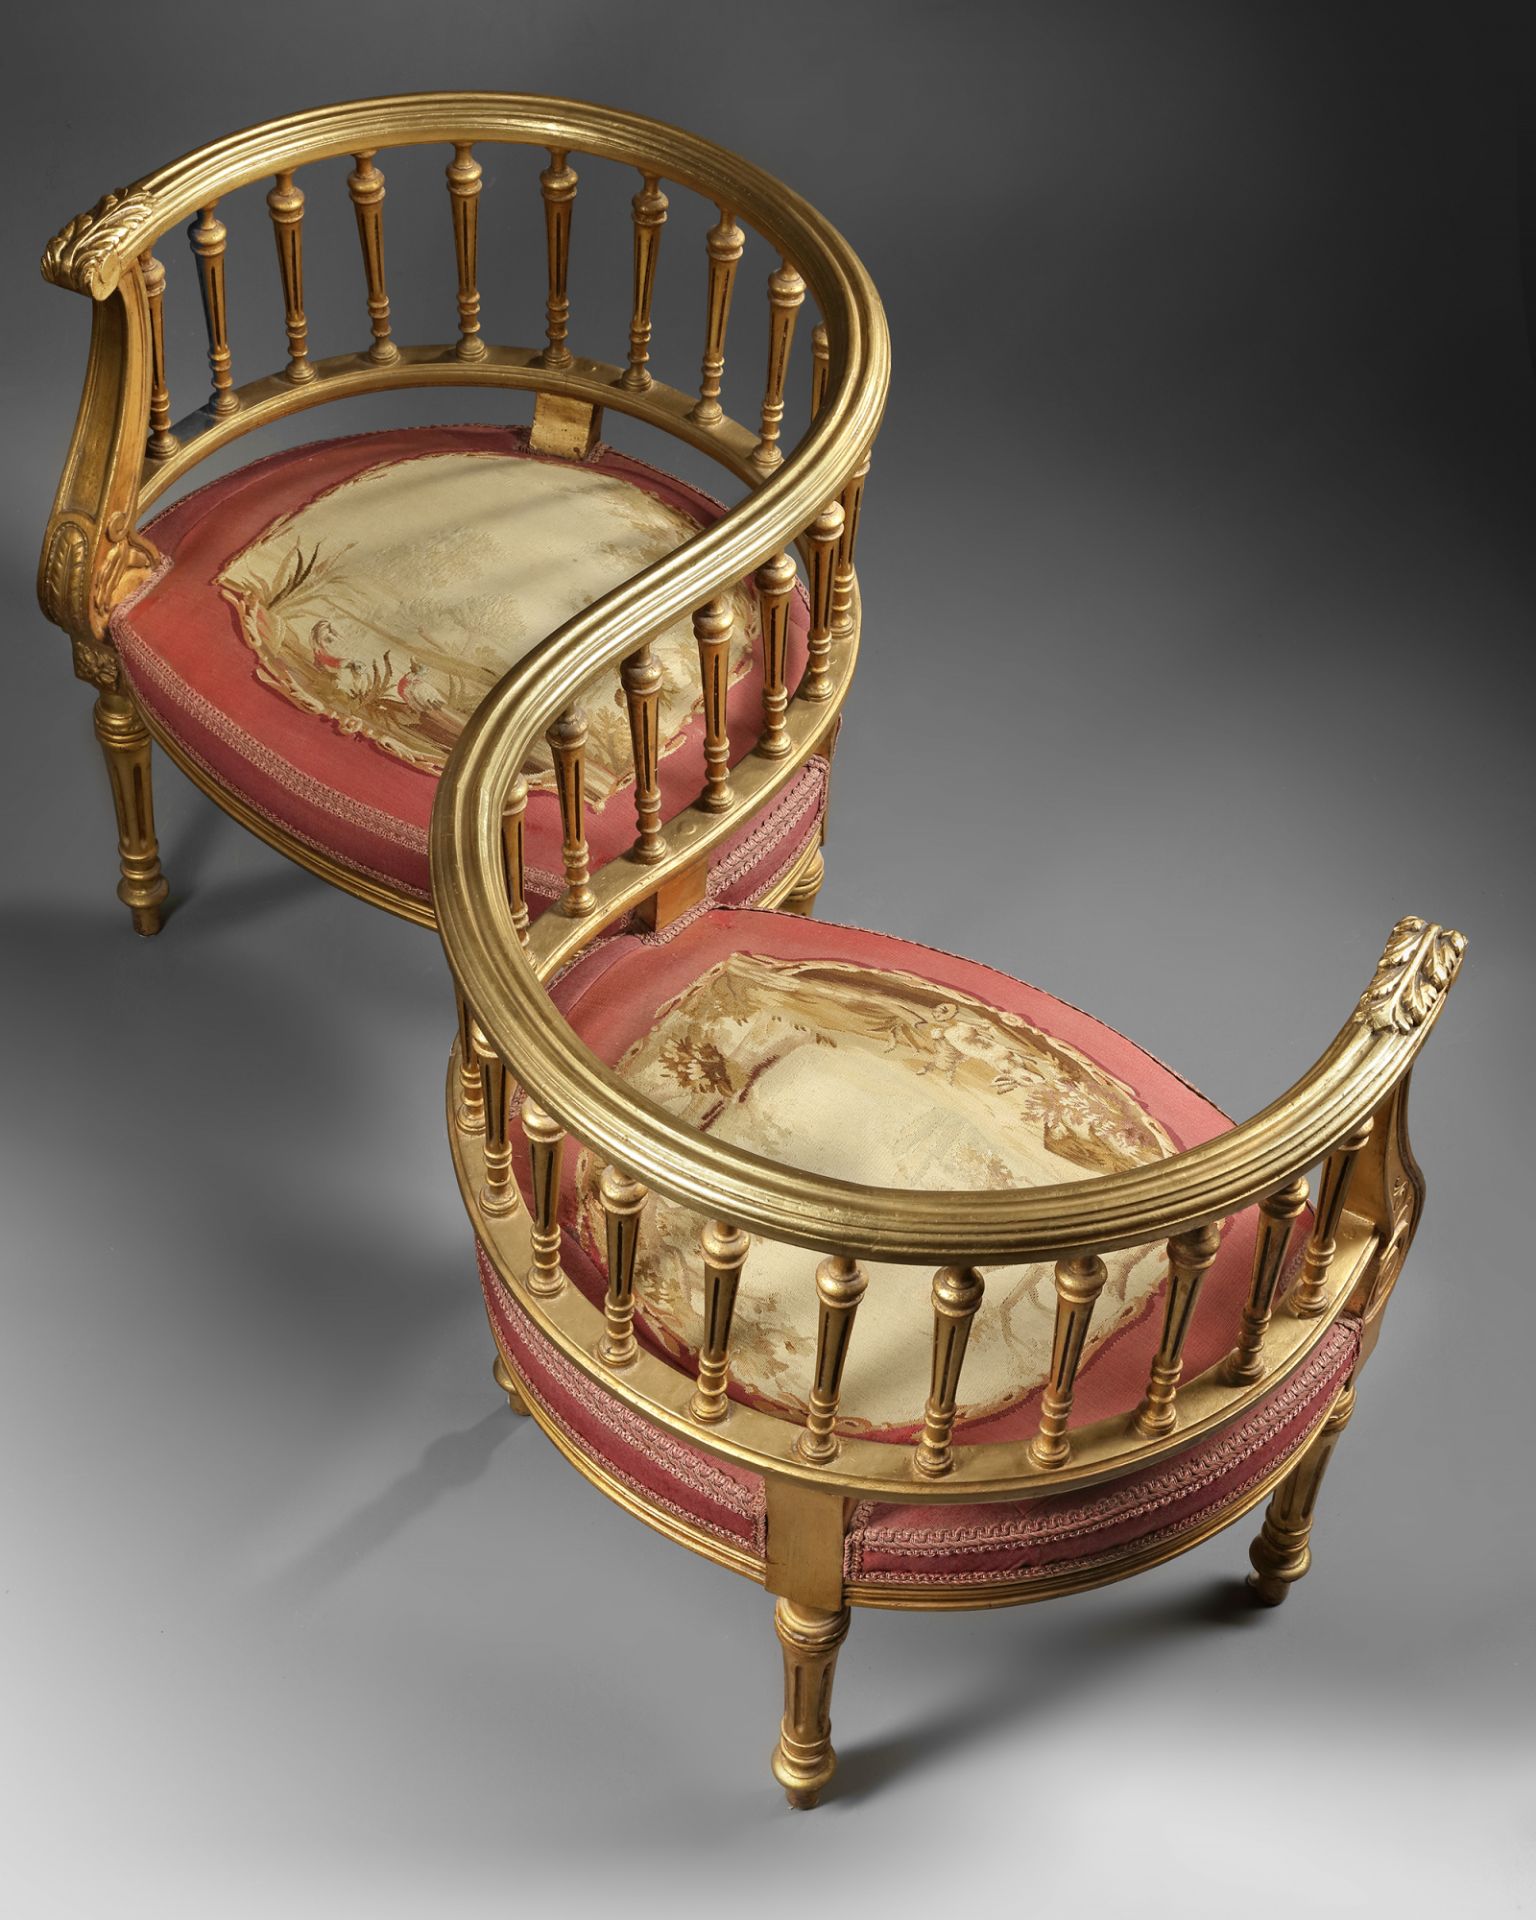 A PAIR OF CONNECTED 'HORSESHOE' CHAIRS, LATE 19TH CENTURY